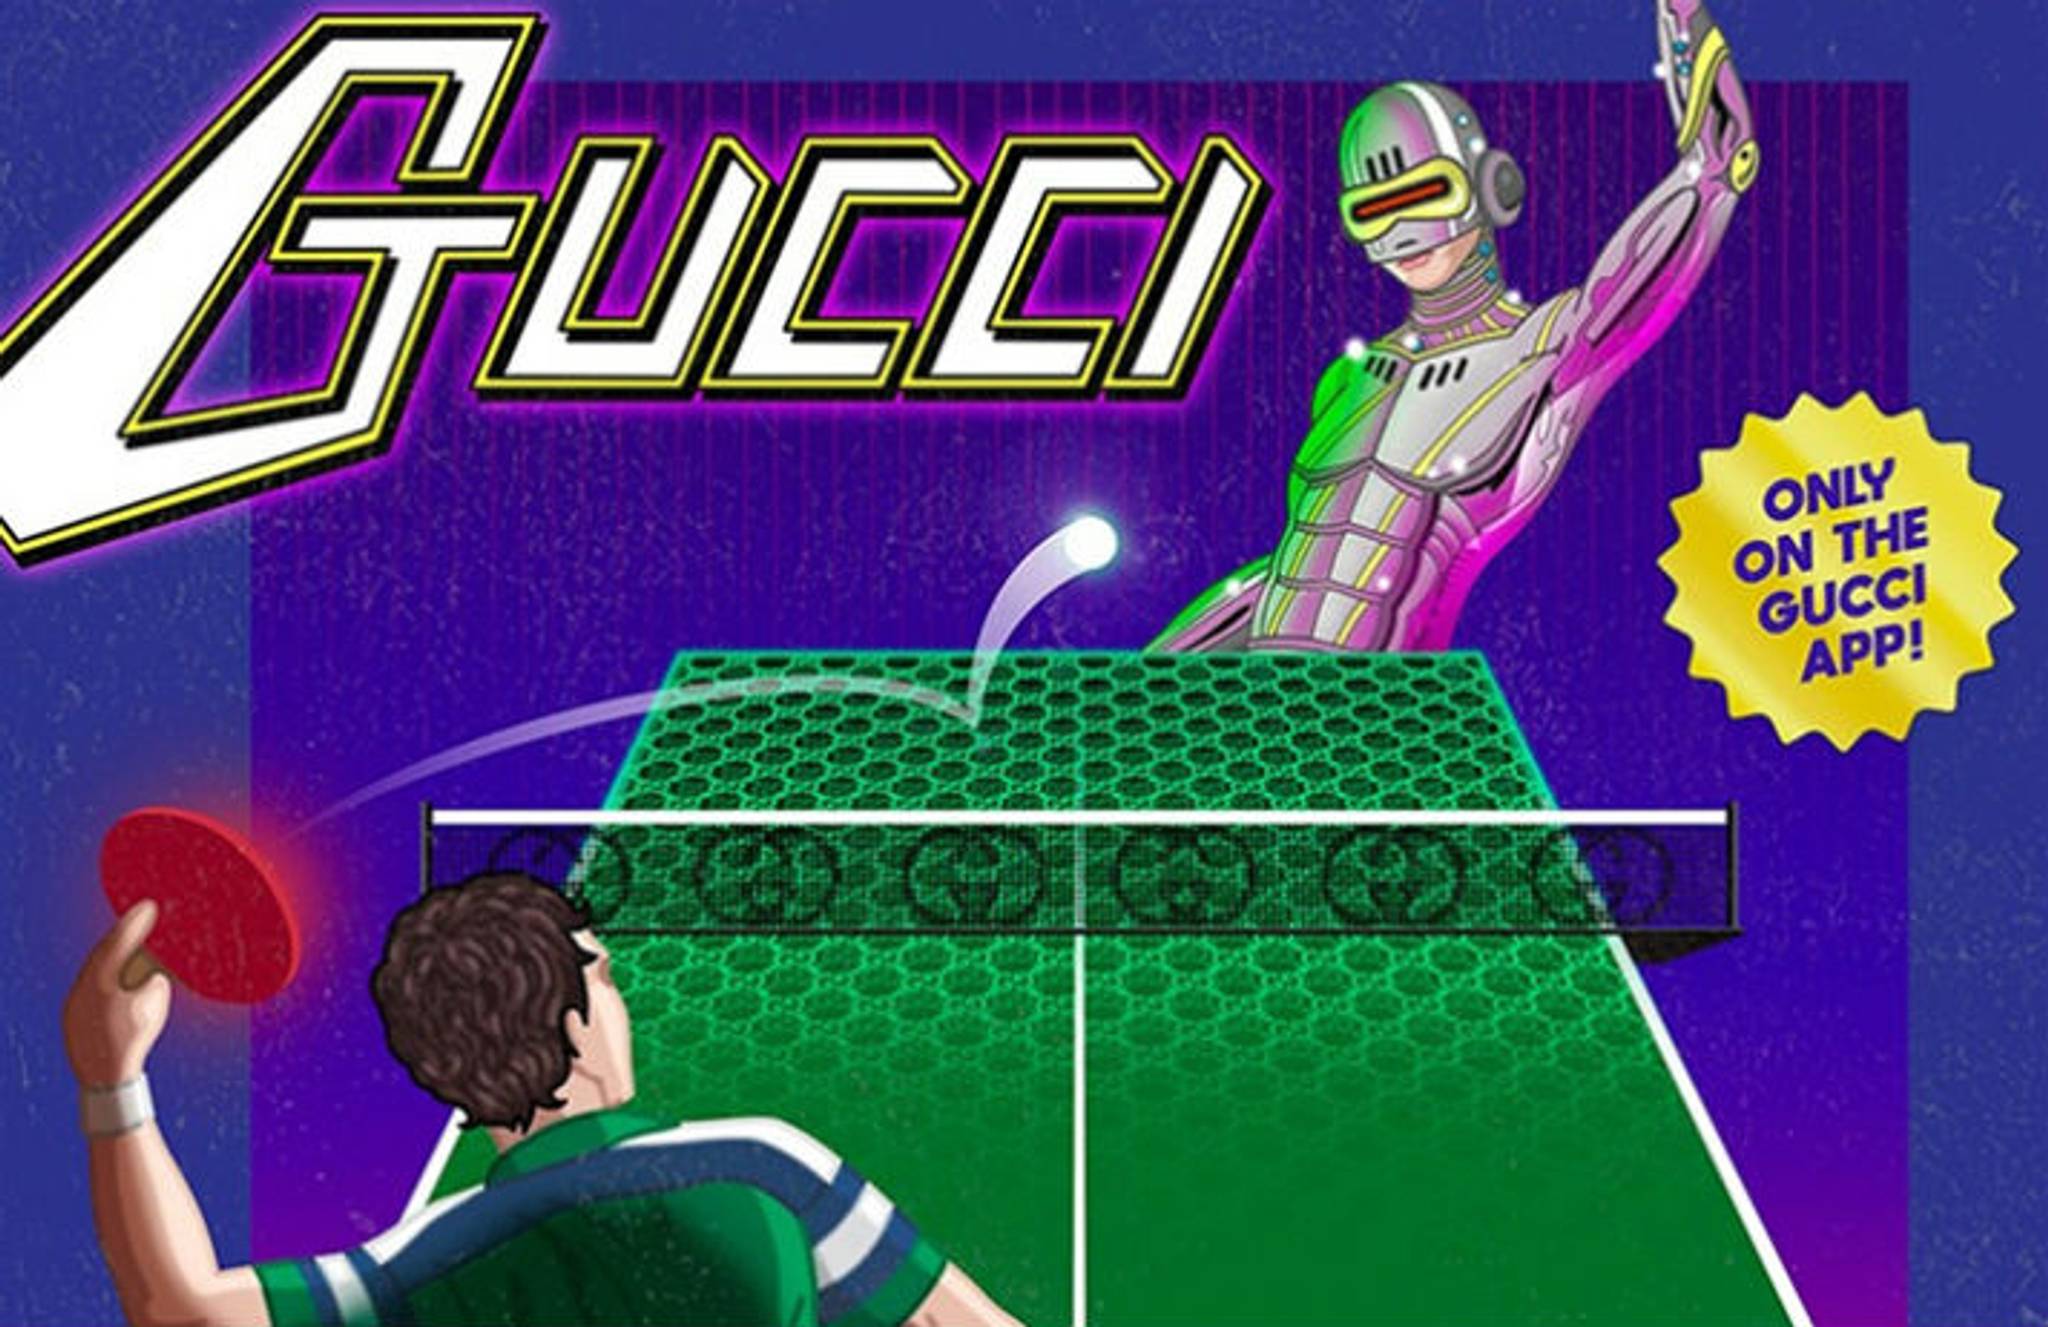 Gucci's arcade app makes luxury more playful